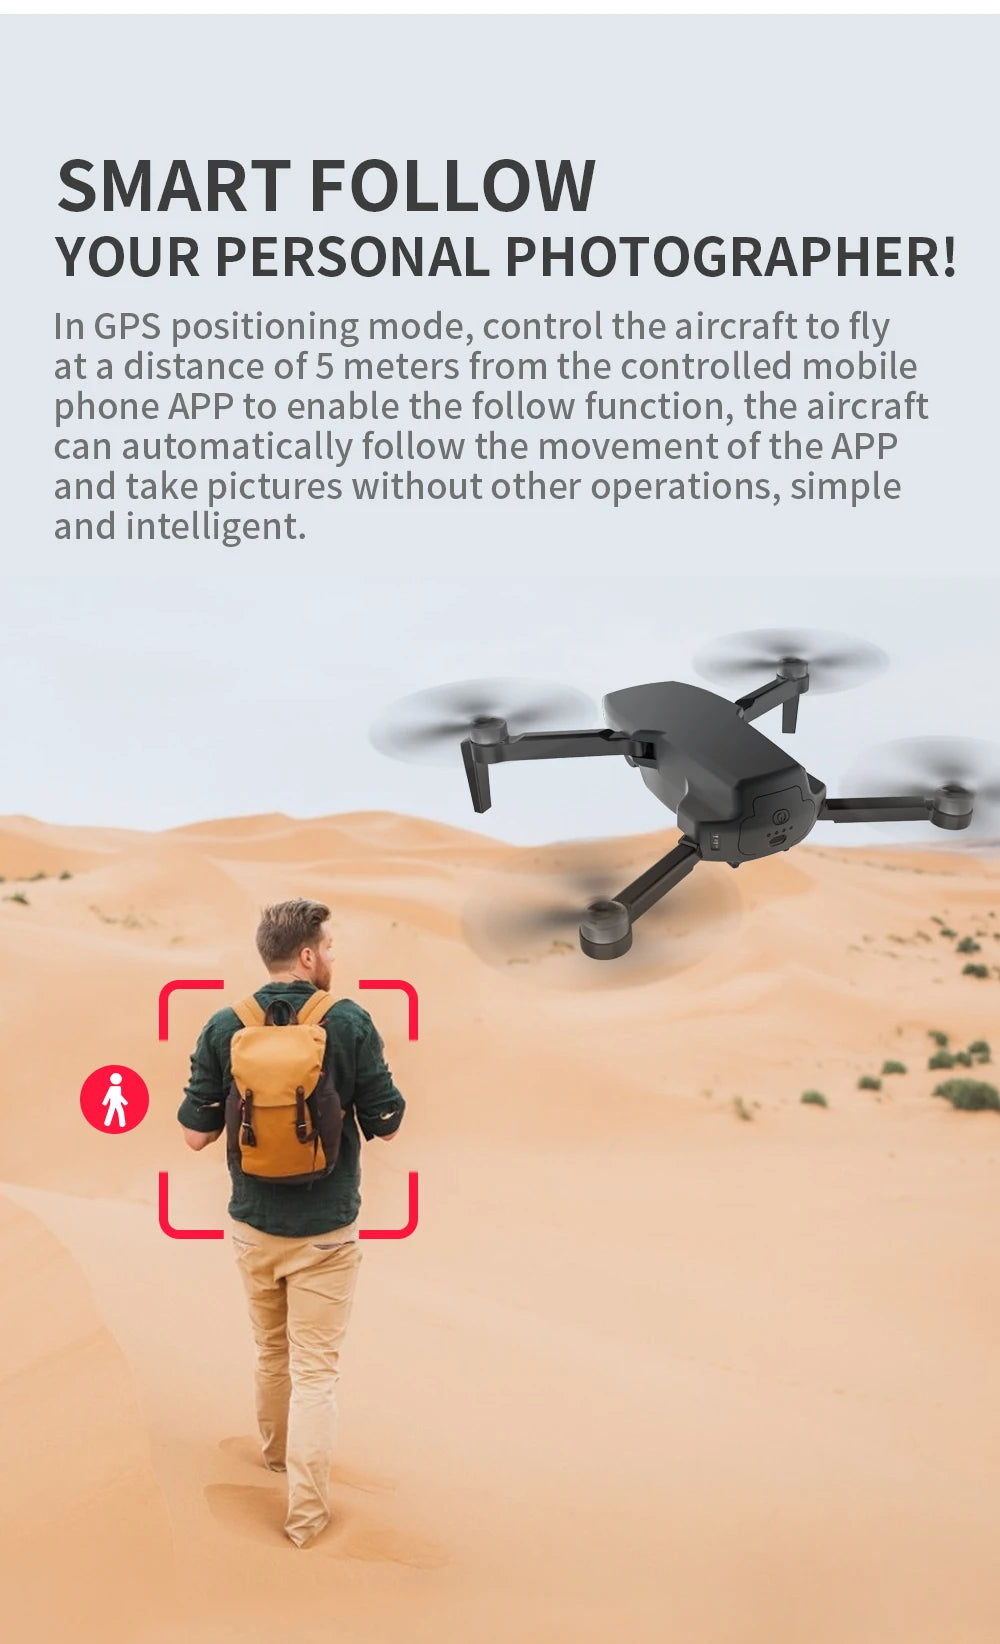 ZLRC SG108 Drone, control the aircraft to fly at a distance of 5 meters from the controlled mobile phone APP